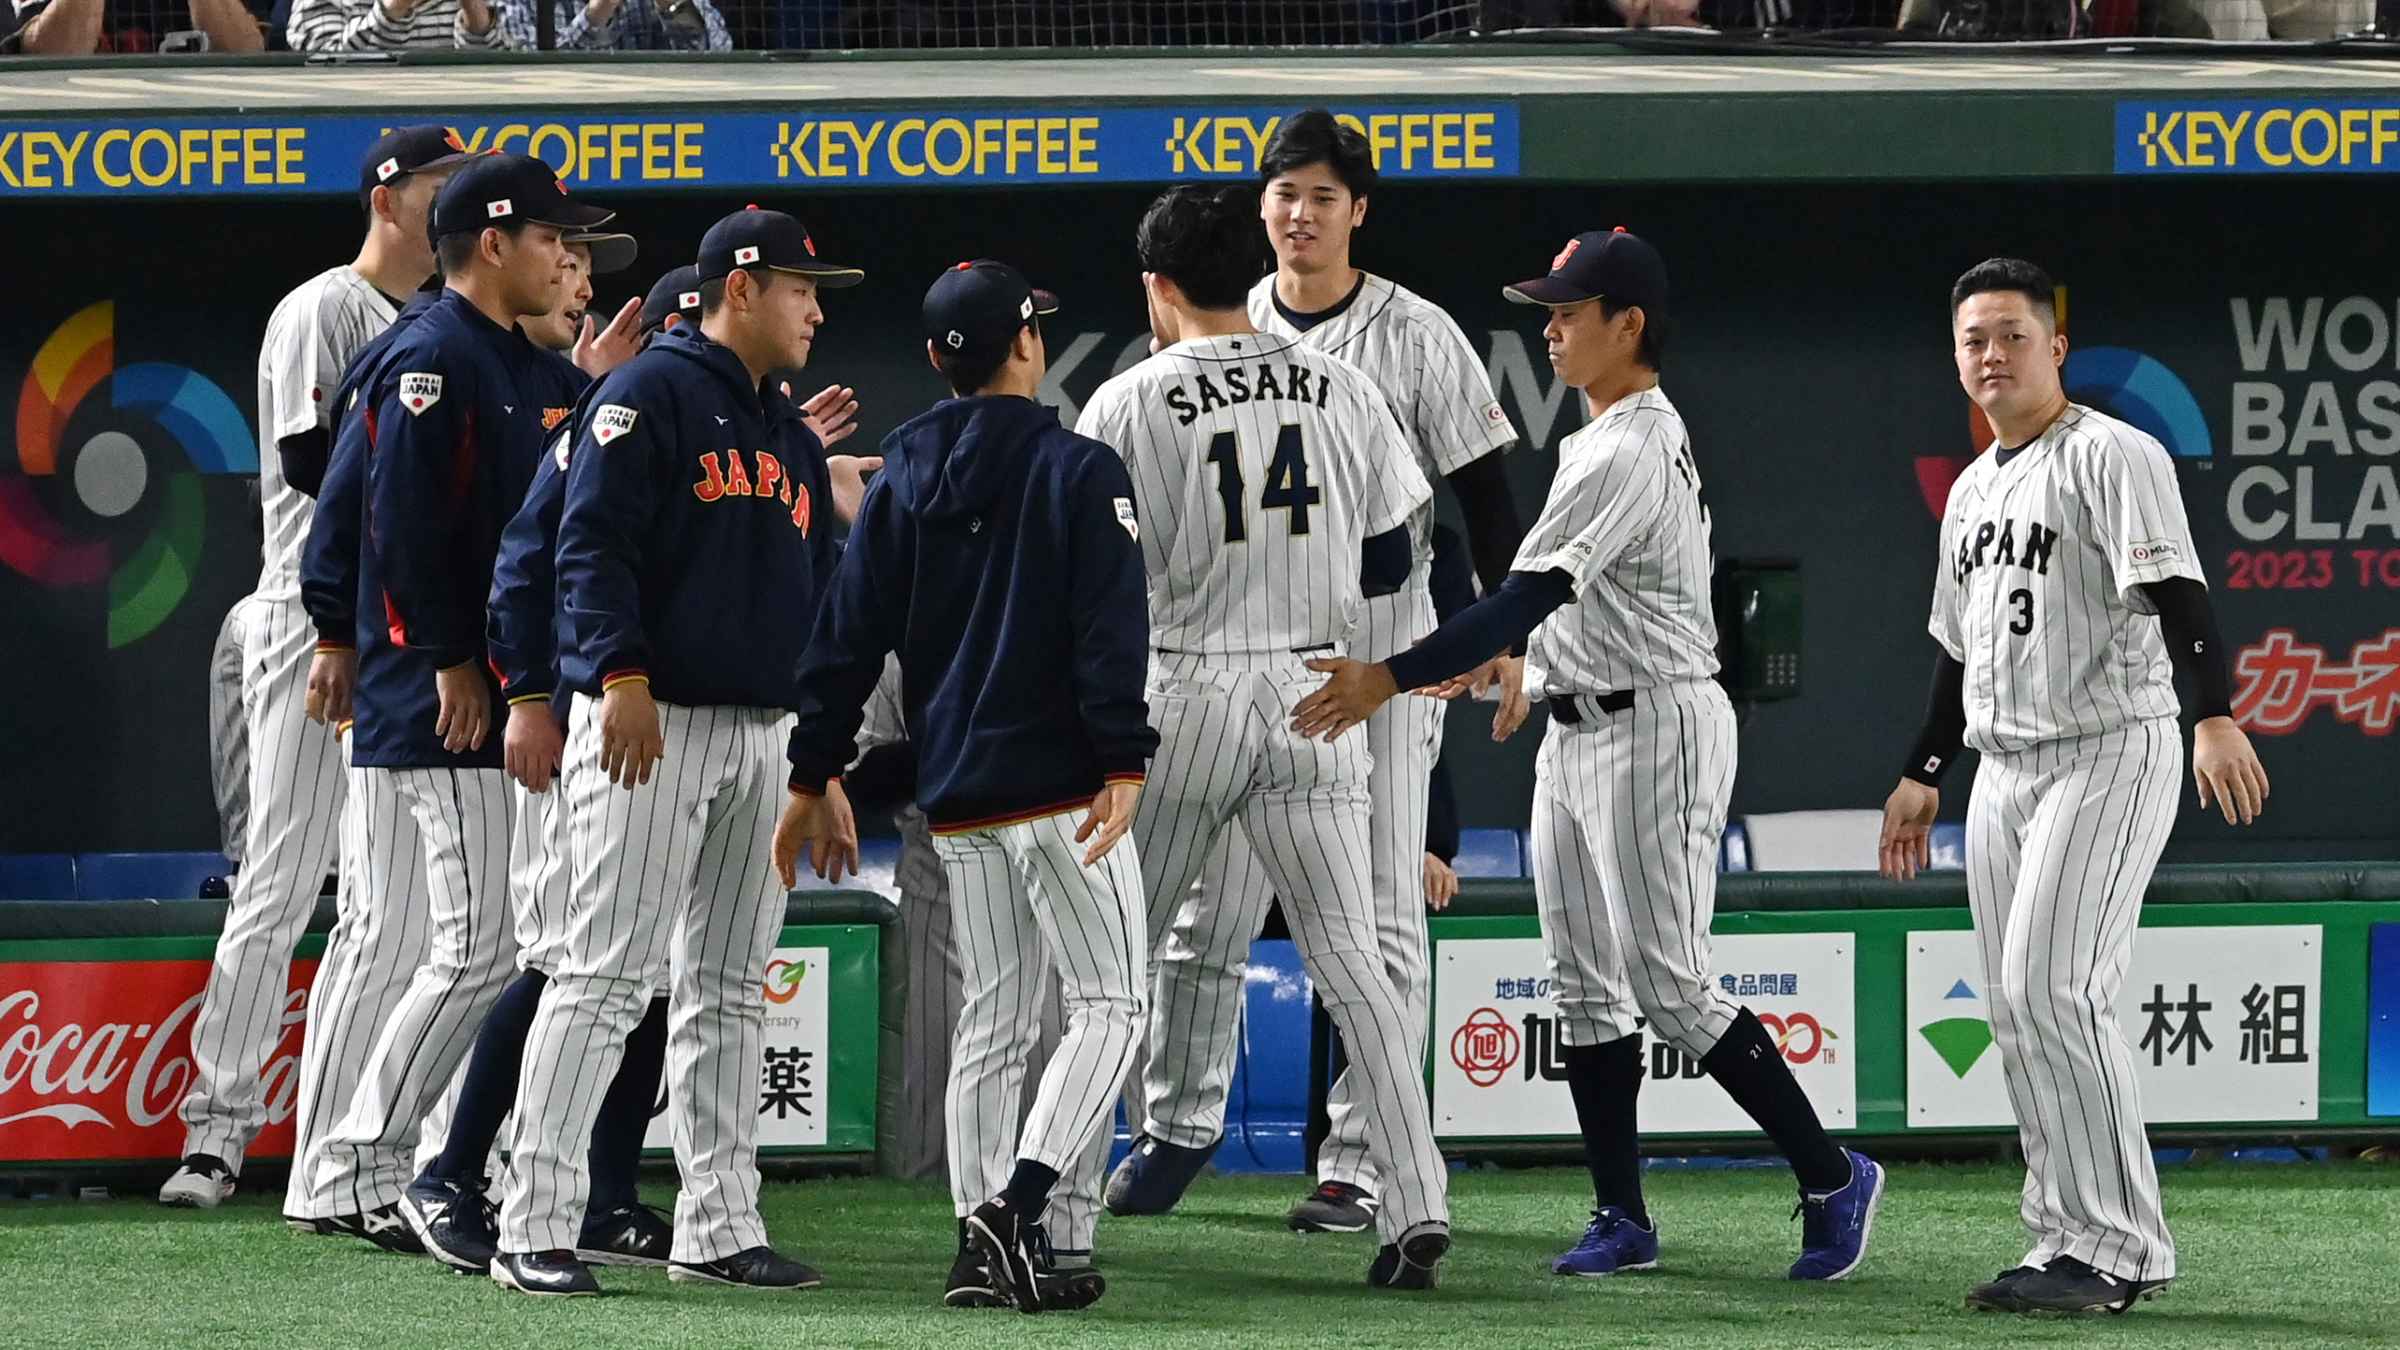 Shohei Ohtani strikes out against Czech electrician in World